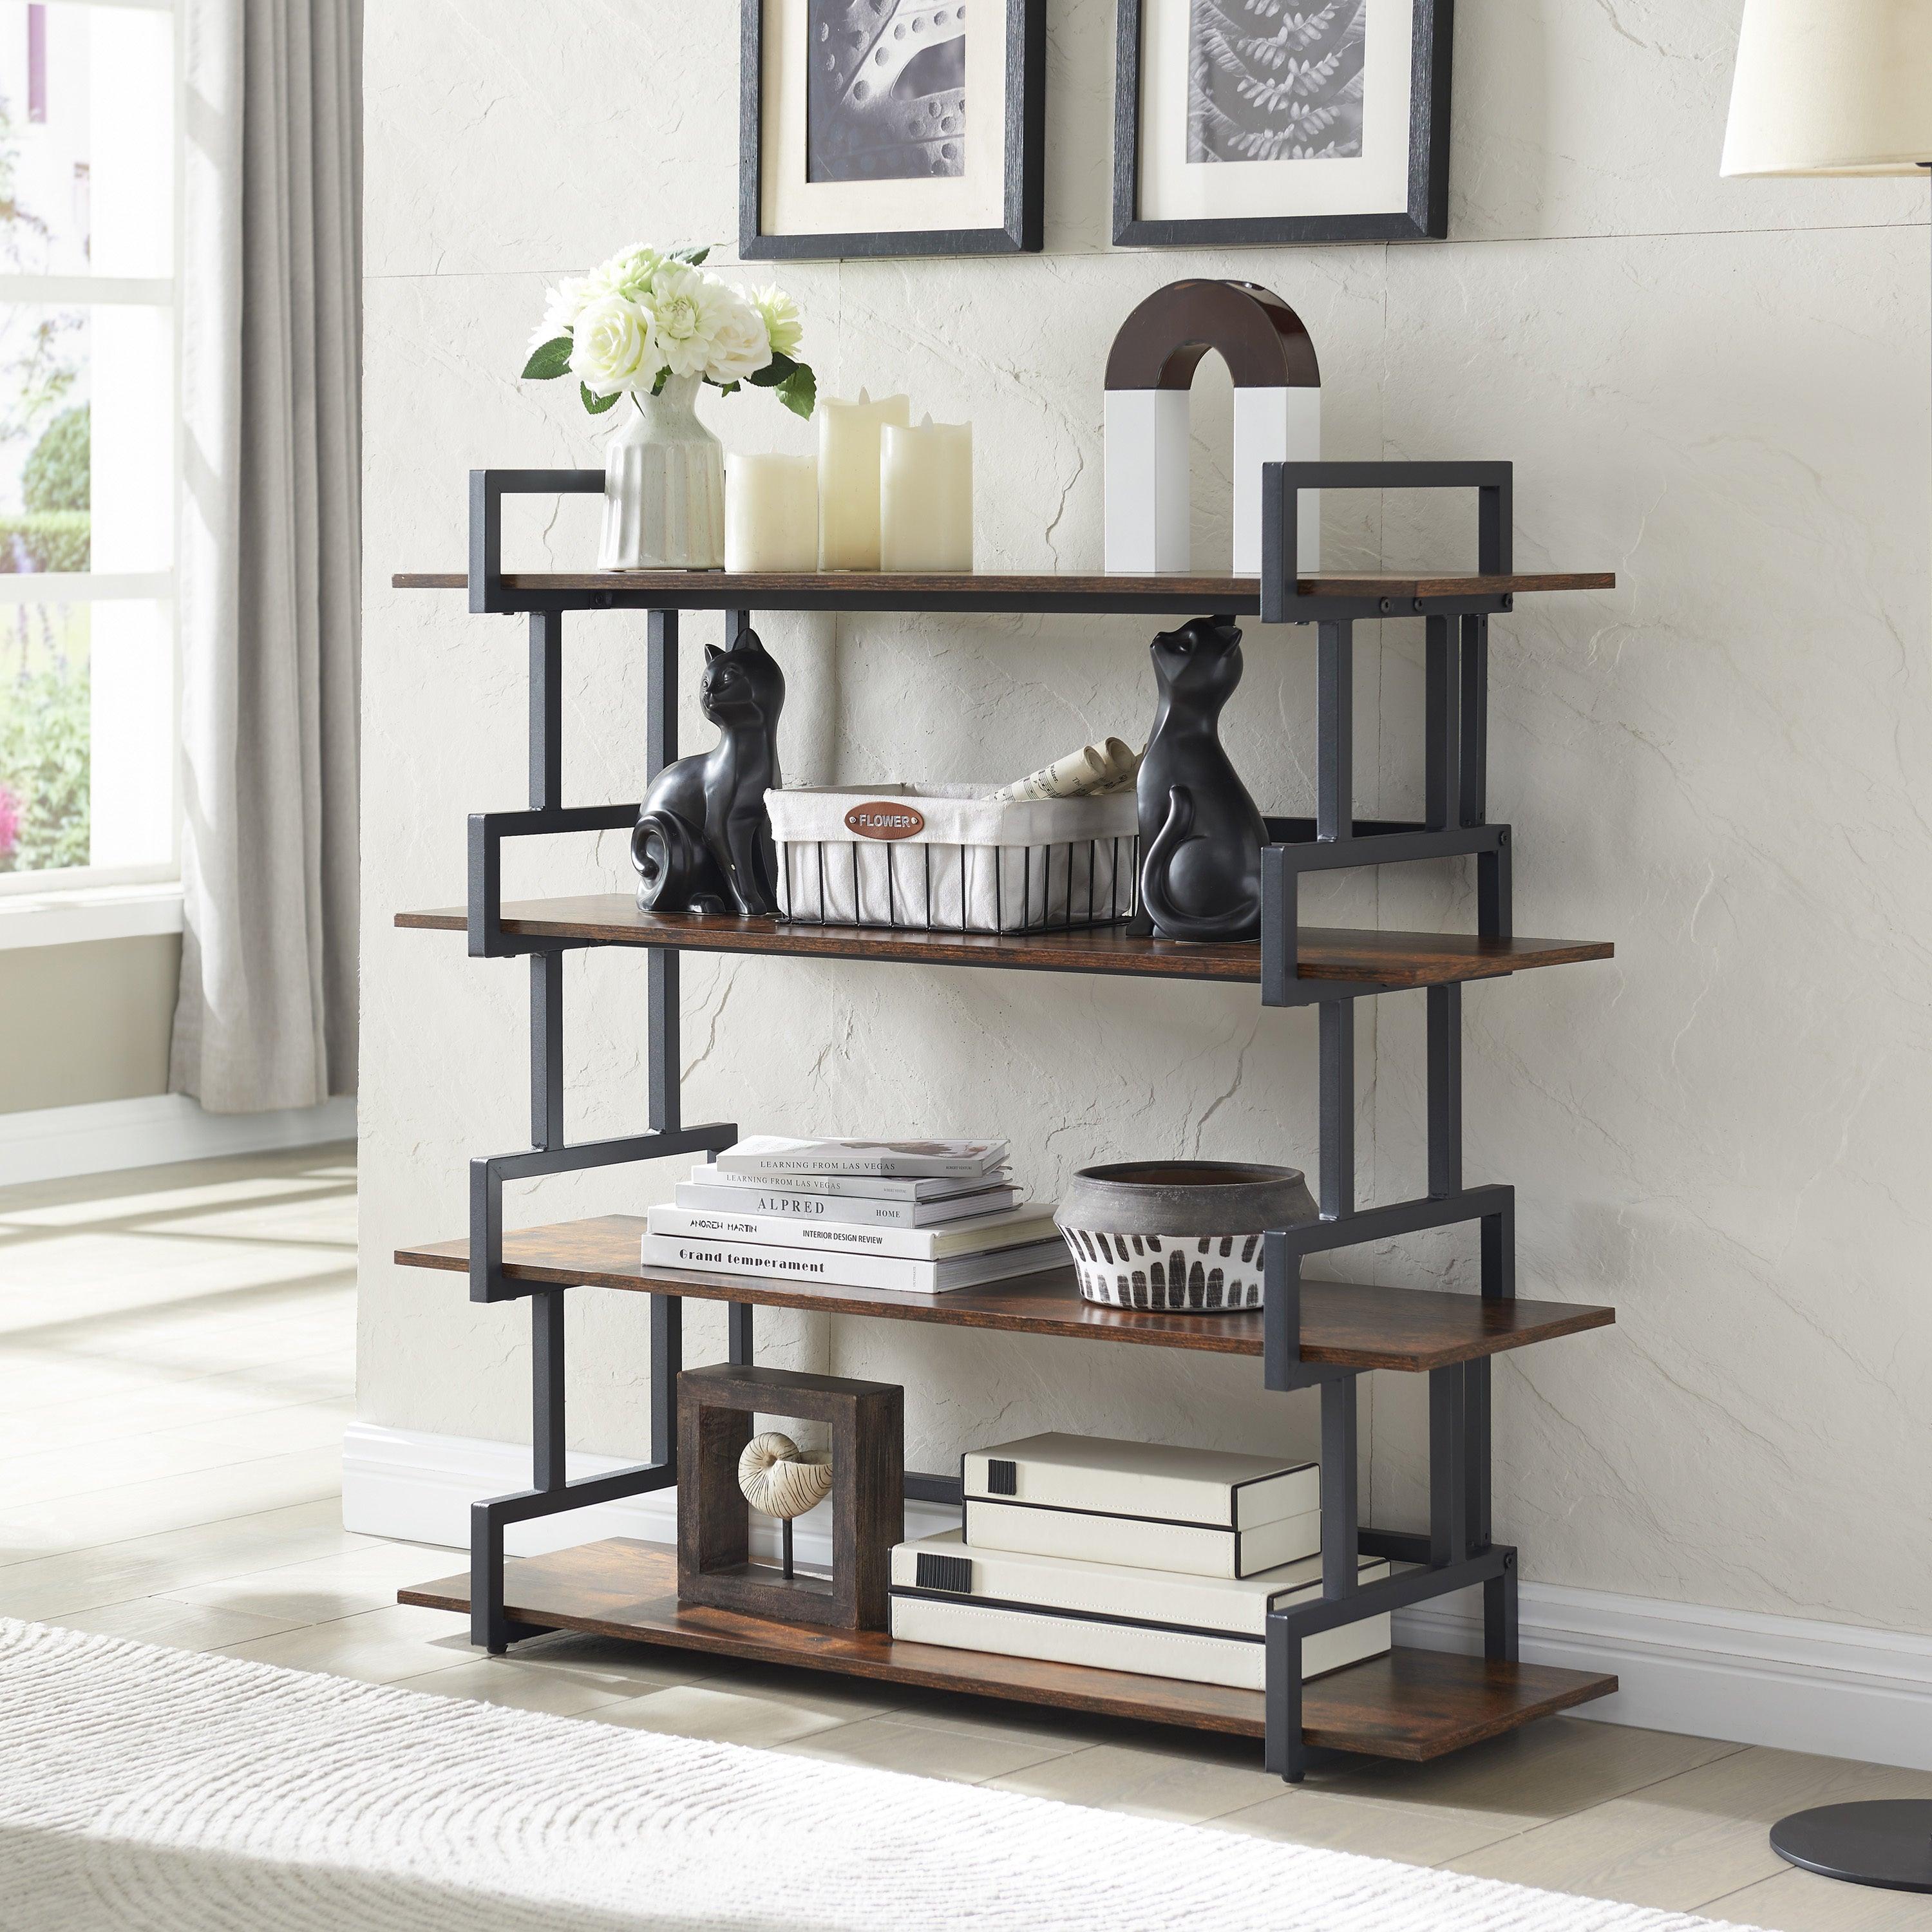 🆓🚛 4 Tier Office Bookcase Shelf Rustic Wood Metal Bookshelves Freestanding Open Book Shelf, Industrial Tall Corner Bookcase Easy To Assemble for Home Office, Living Room & Bedroom,